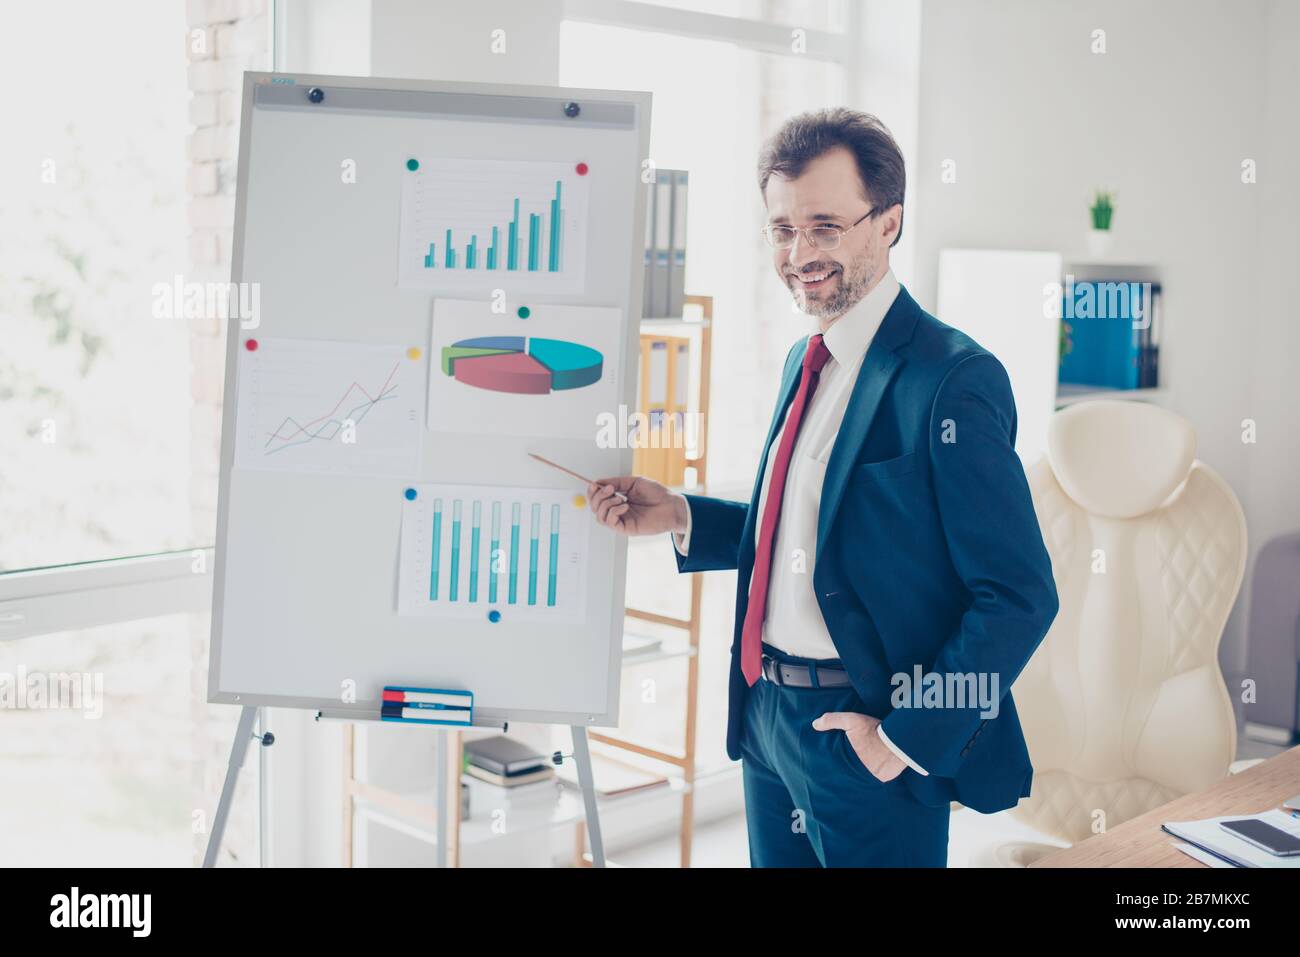 Smiling successful businessman is reporting with the flip chart in office. He is in blue suit, glasses and red tie Stock Photo